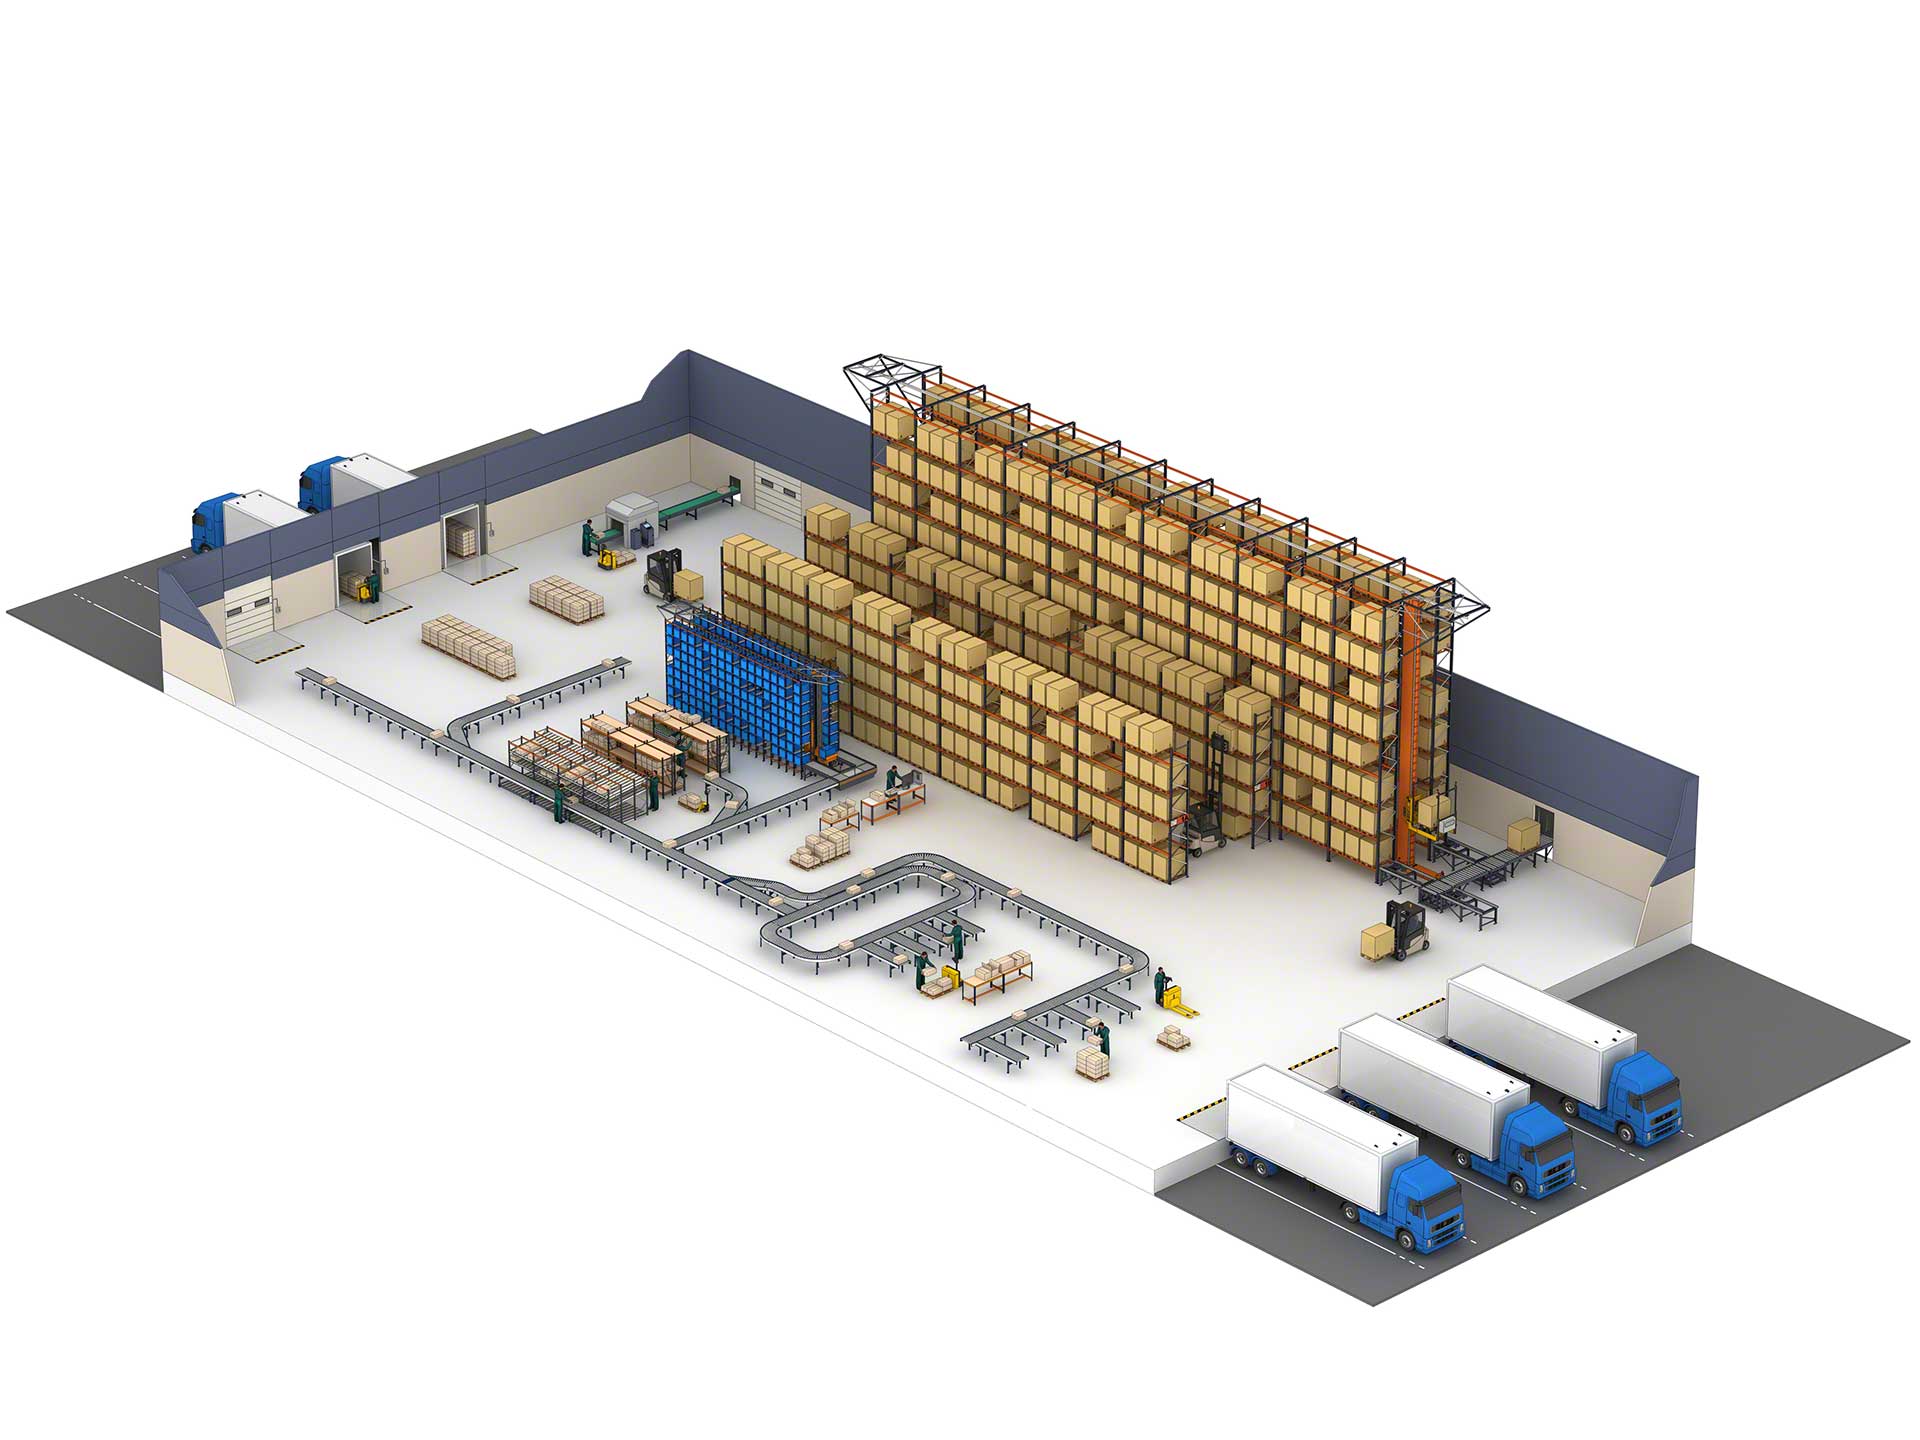 When should you rethink your warehouse’s design?